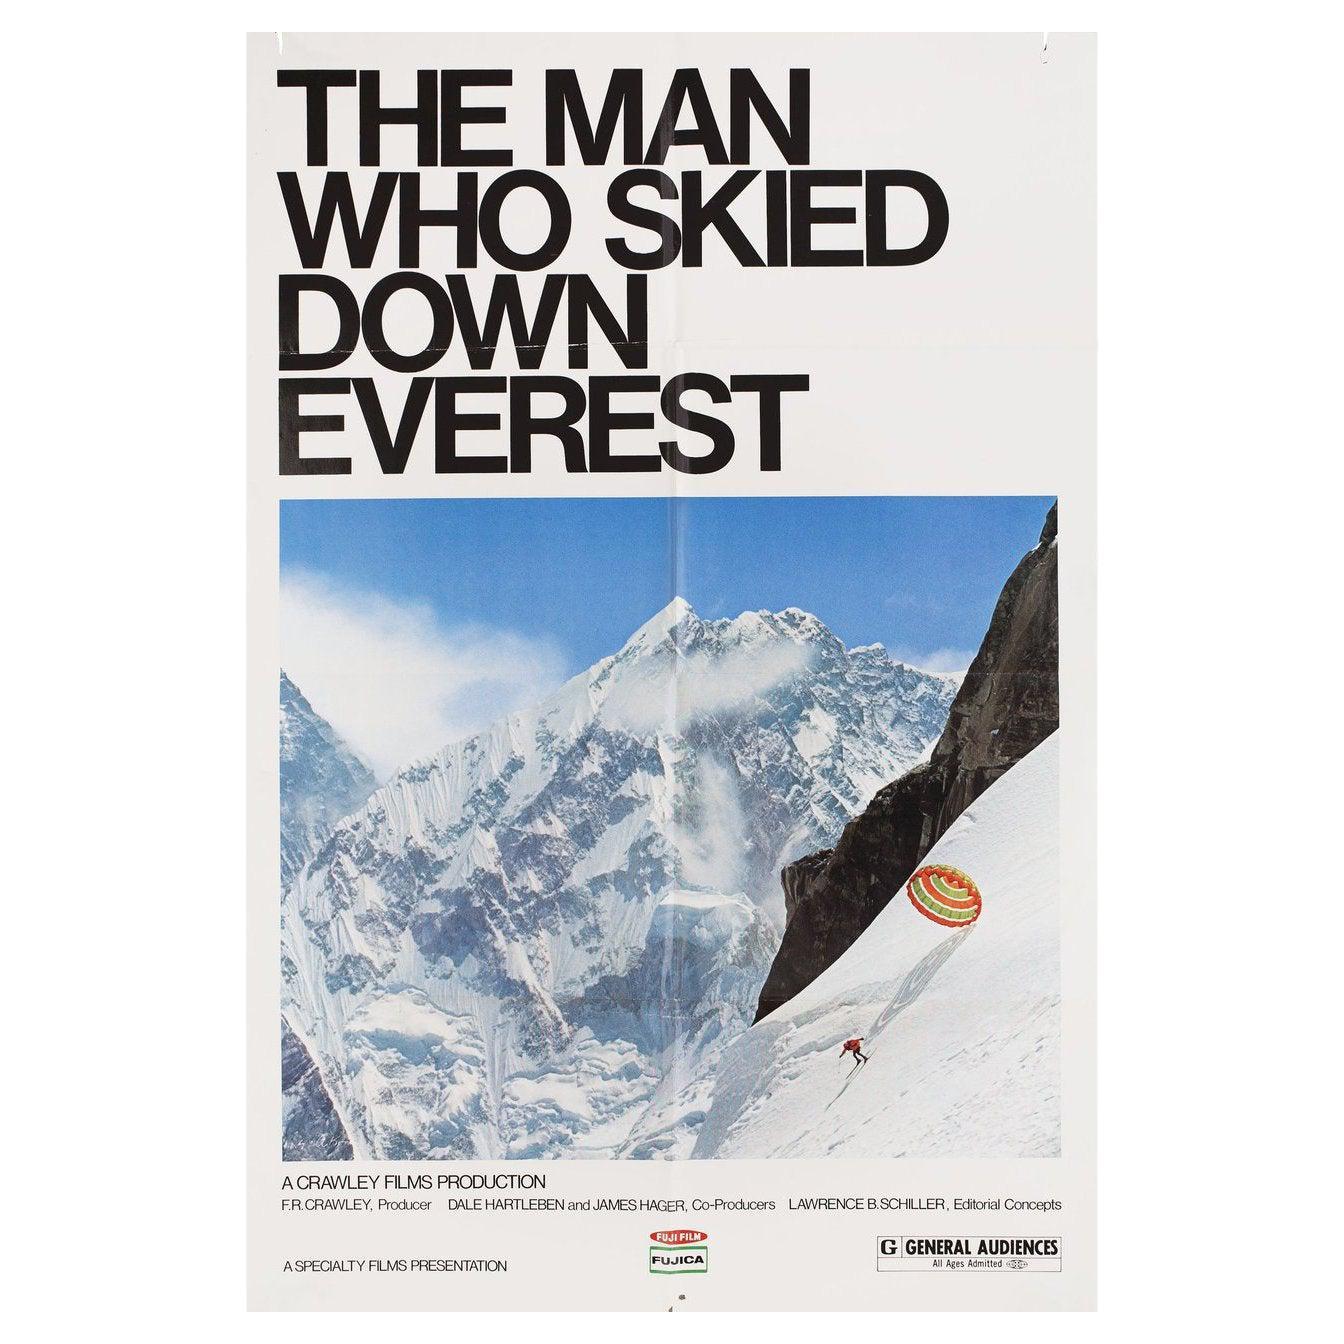 The Man Who Skied Down Everest 1975 U.S. Film Poster